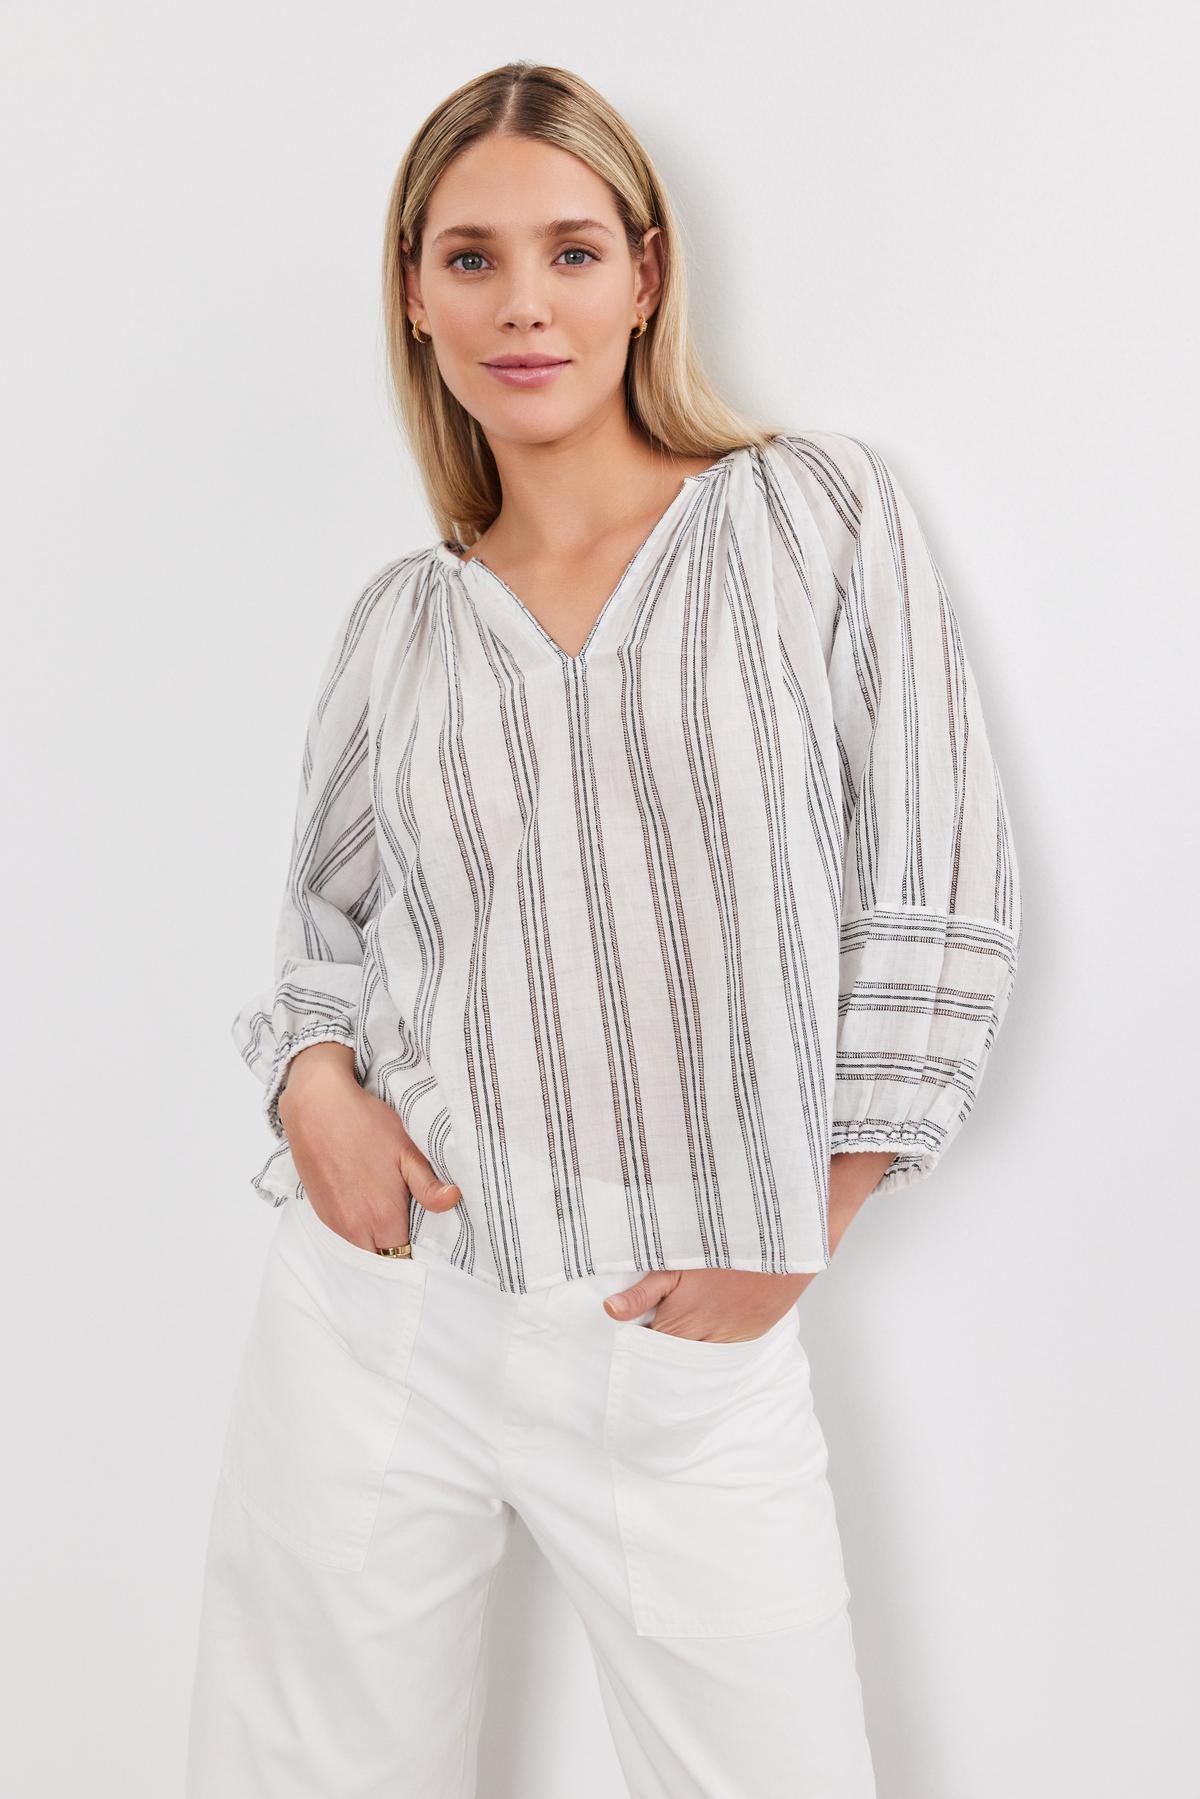   A woman stands confidently, wearing the Gianna top by Velvet by Graham & Spencer with vertical stripes and white pants, with her hand in her pocket. 